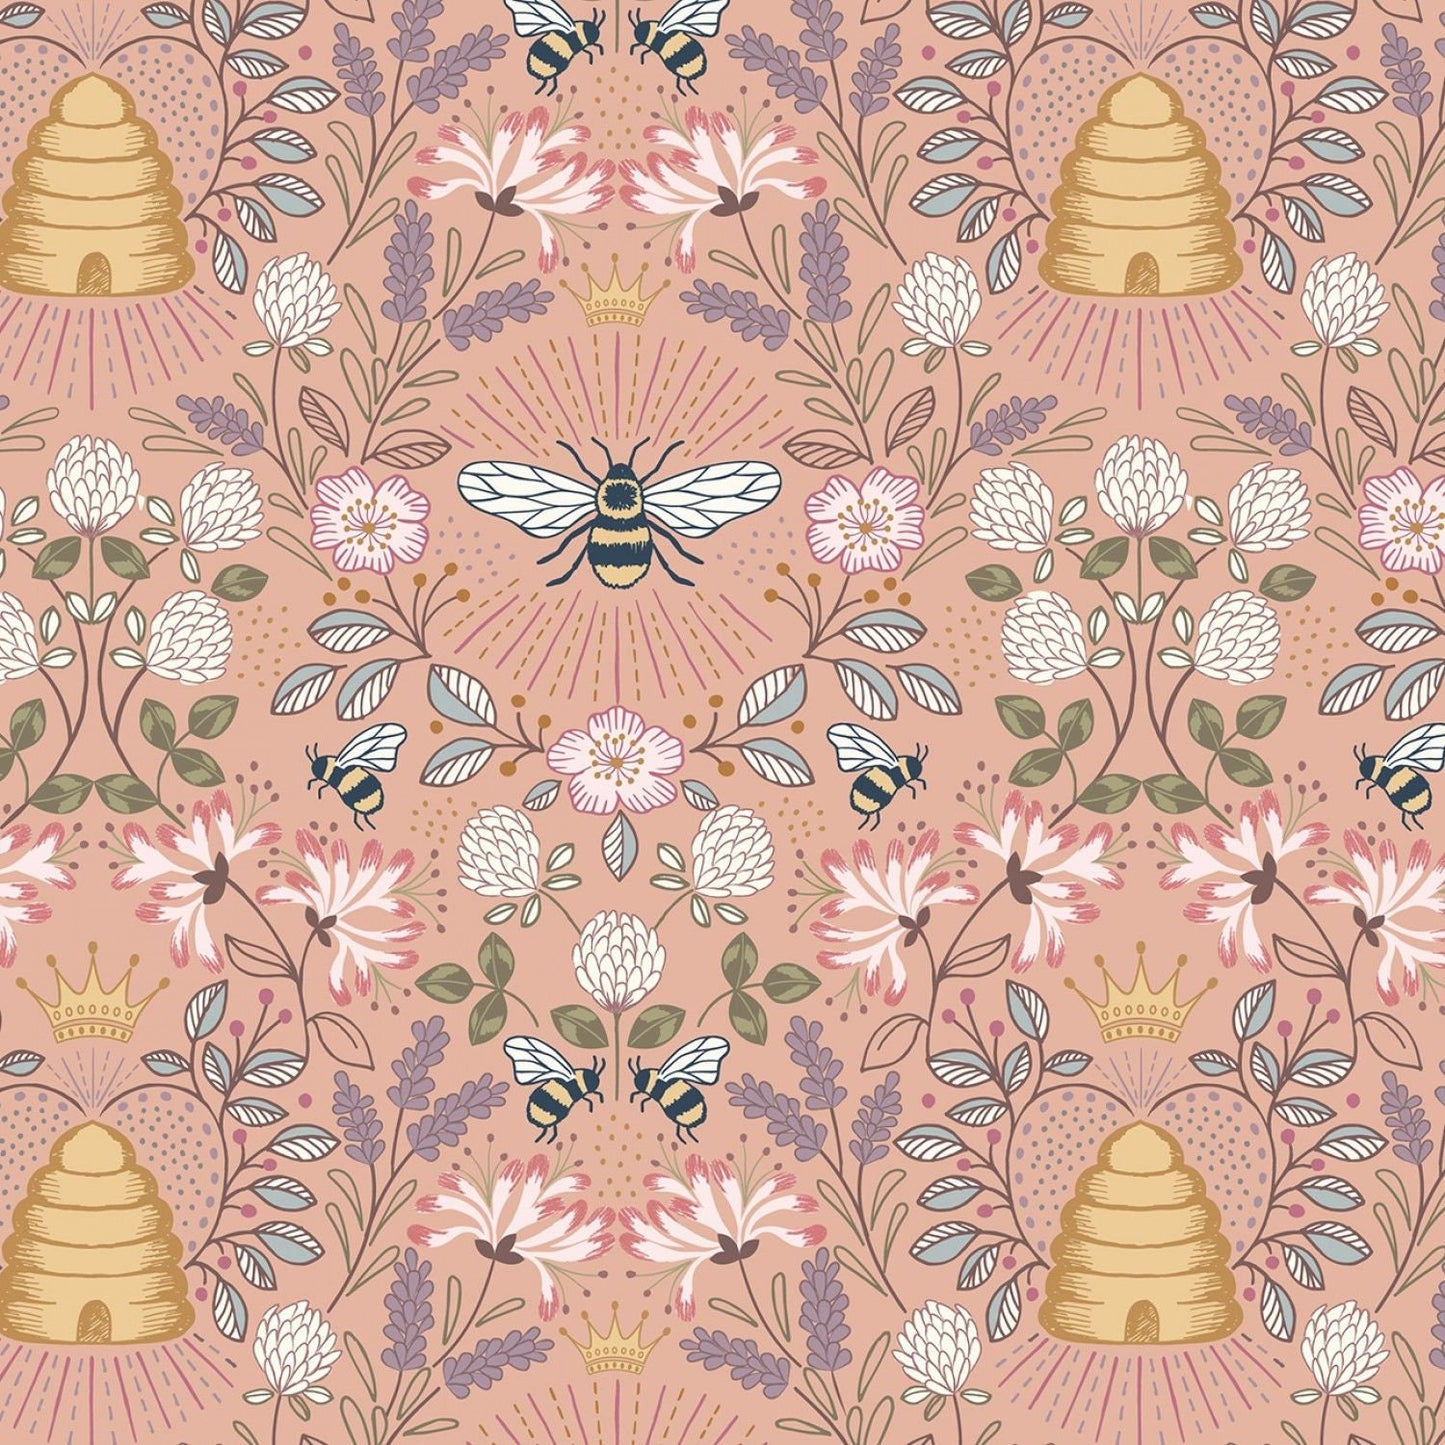 Queen Bee Bee Hive on Peach A500.2 Cotton Woven Fabric